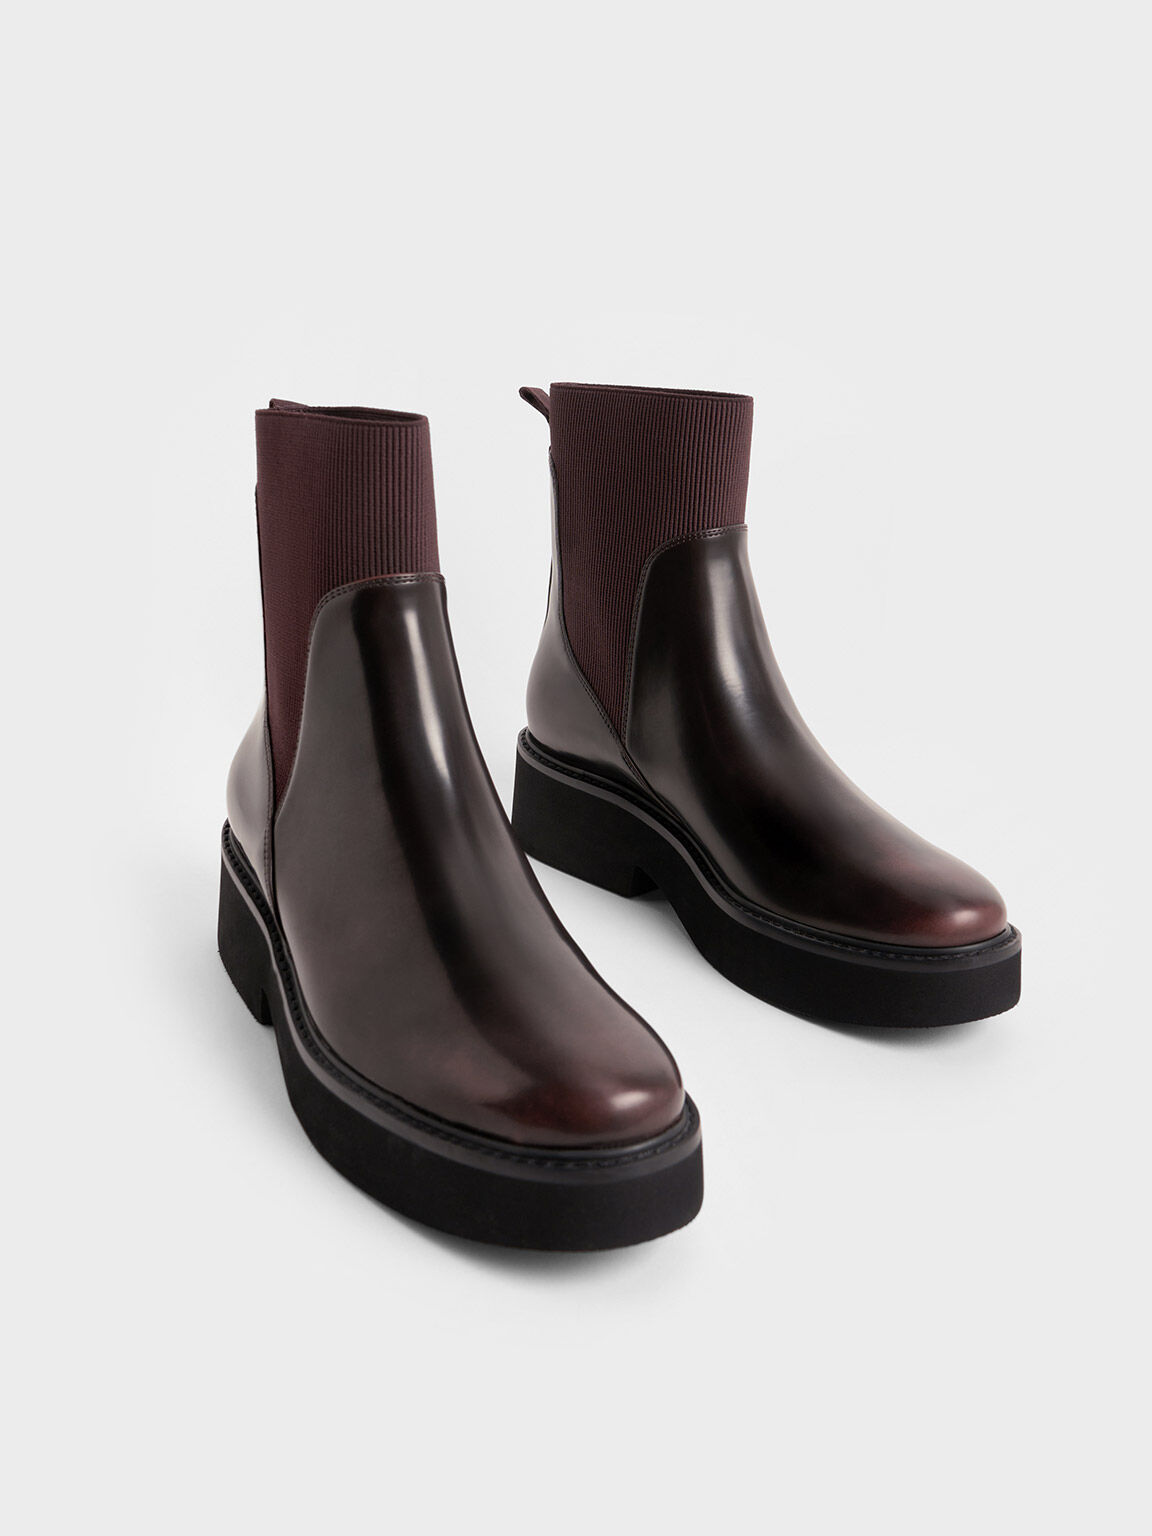 Women's Boots | Shop Exclusive Styles | CHARLES & KEITH International